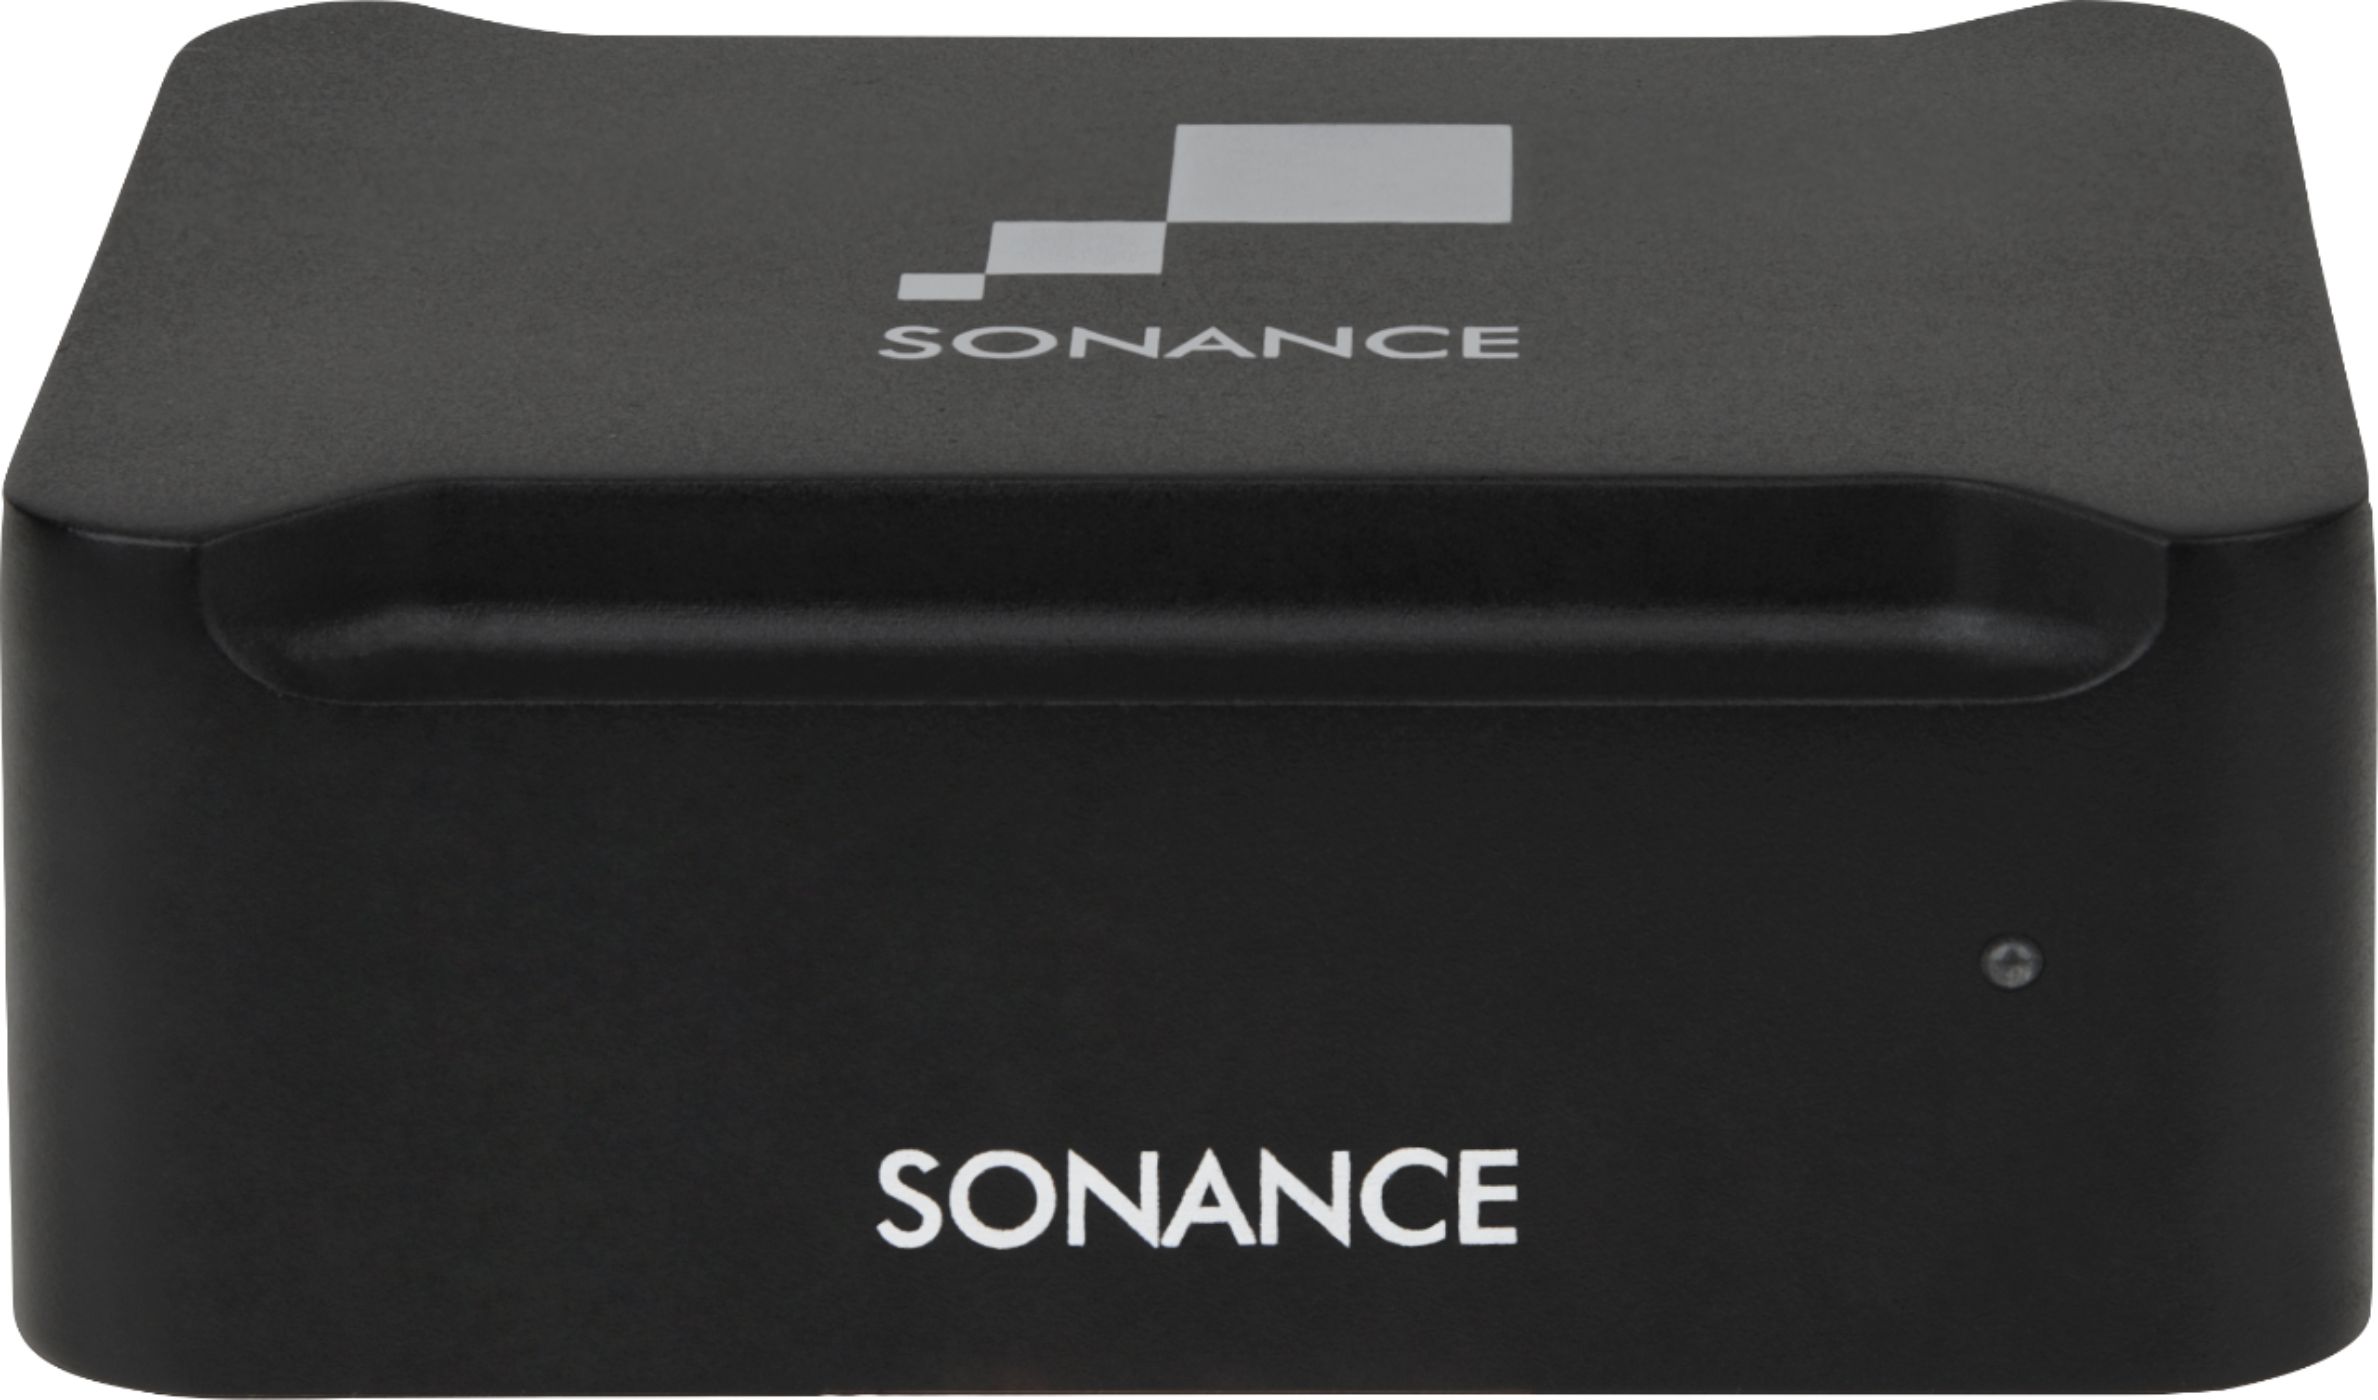 Angle View: Sonance - MS WIRELESS KIT - Wireless Transmitter and Receiver Kit (Each) - Black